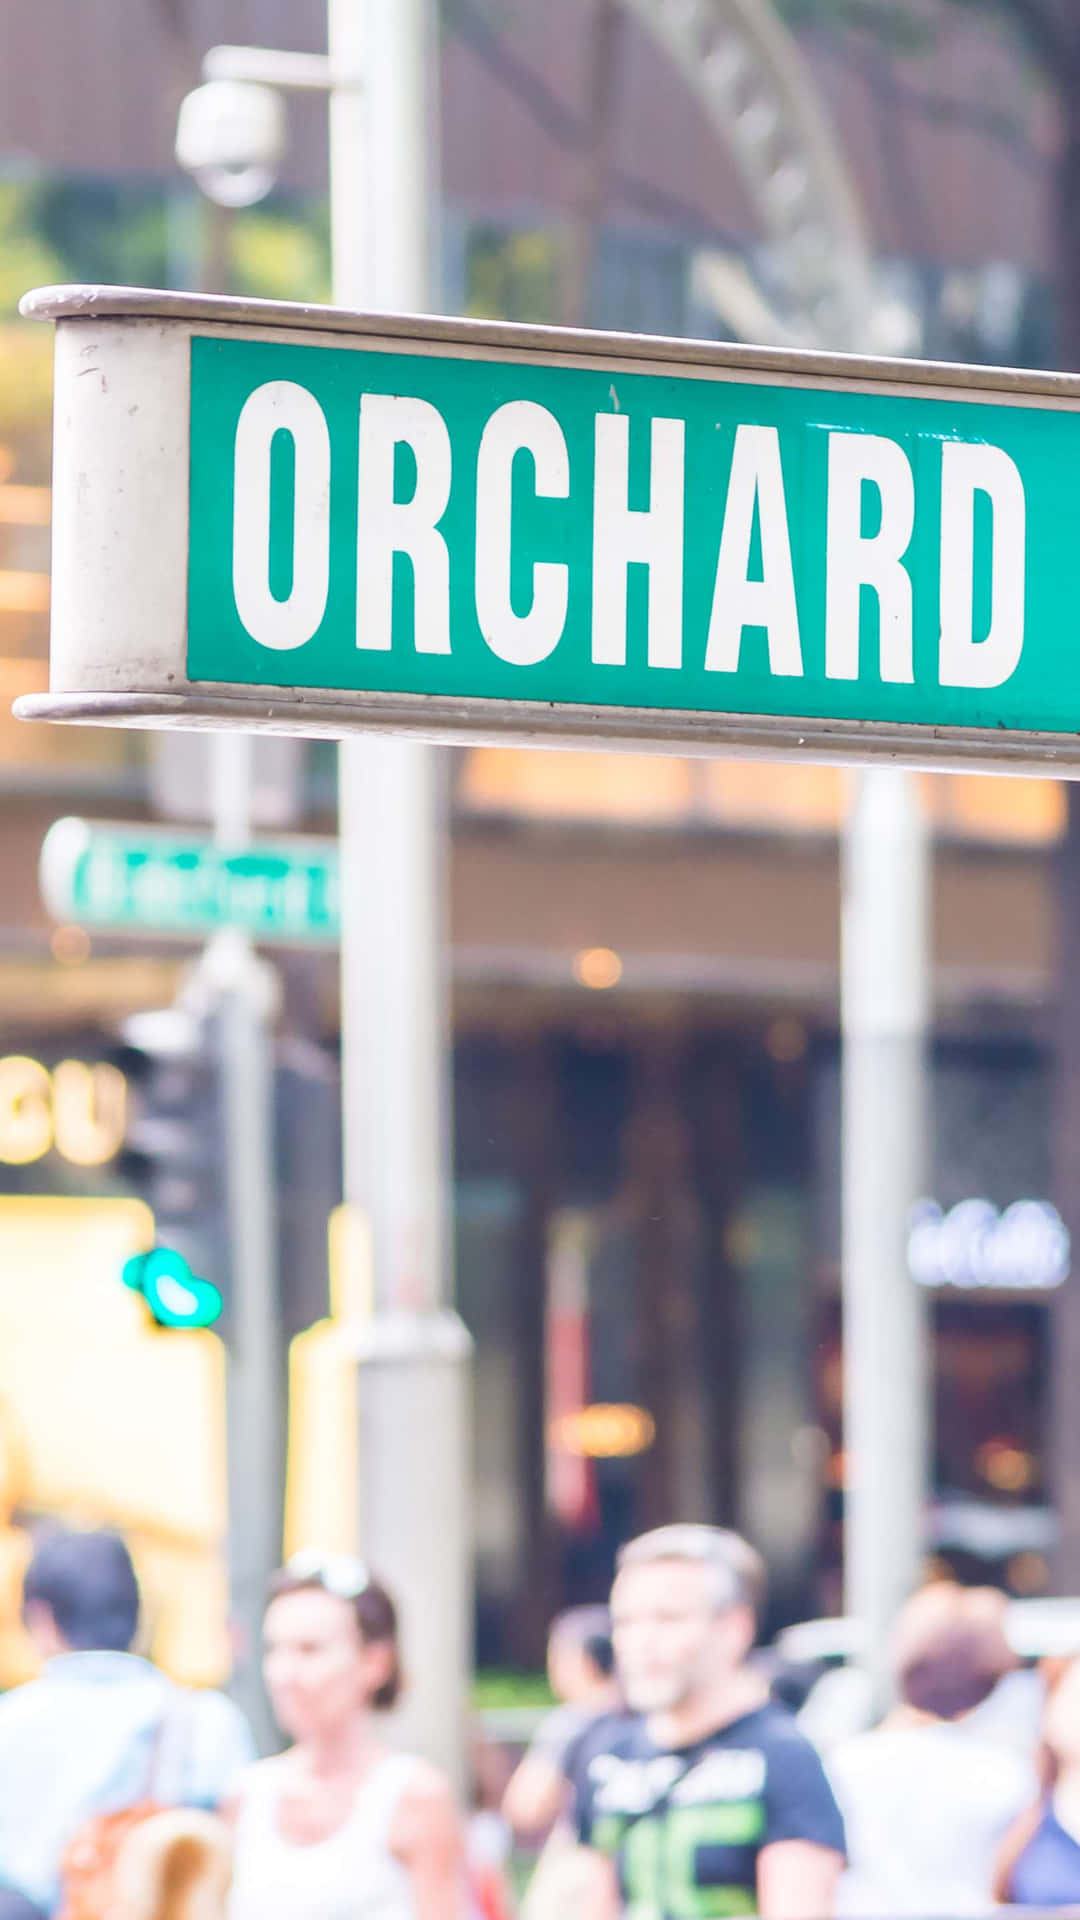 Orchard_ Road_ Sign_ Above_ Crowded_ Street_ Scene Wallpaper